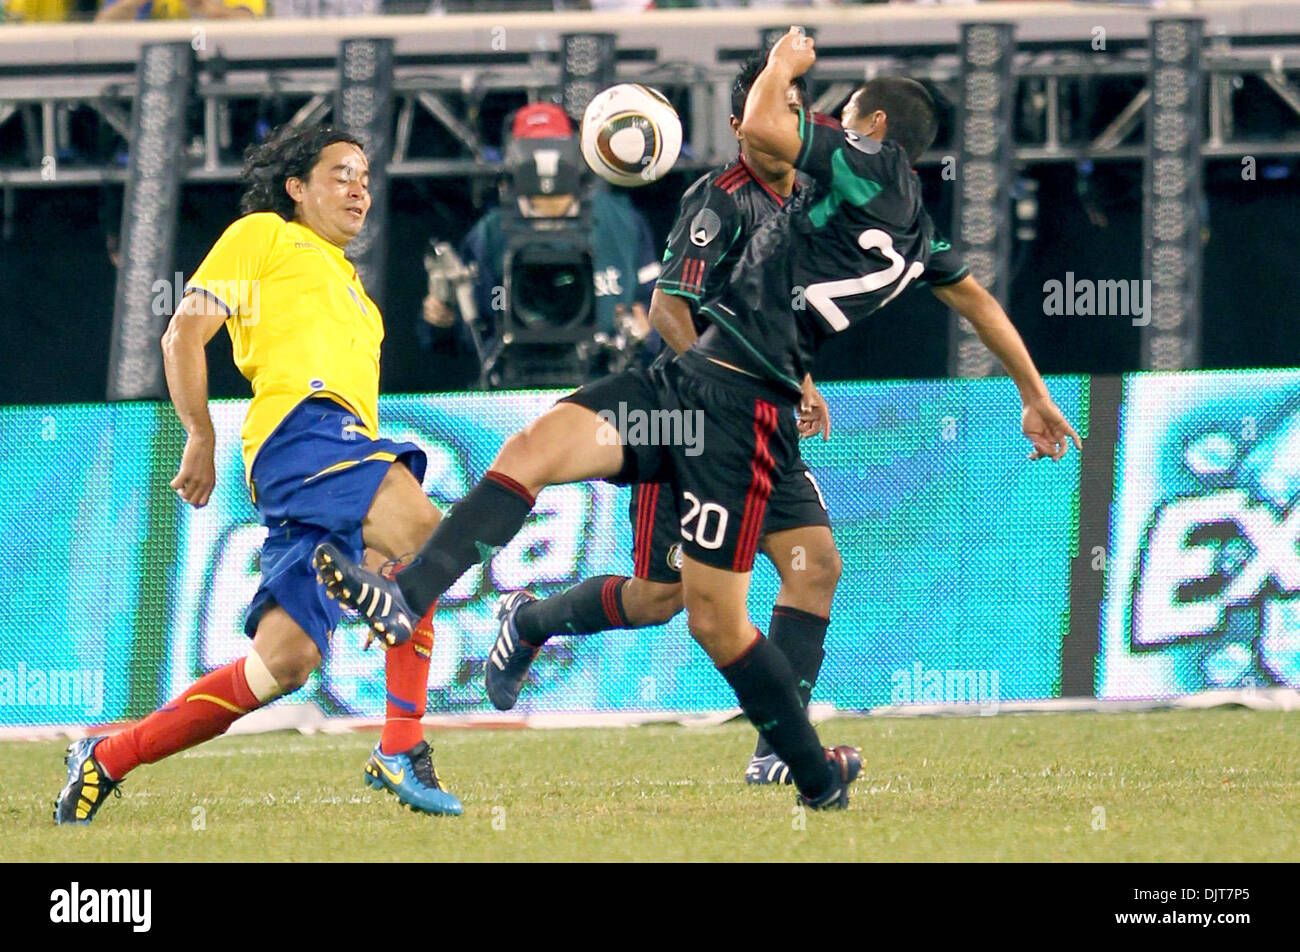 07 May  2010:  Mexico Defender Jorge Torres Nilo (#20) looses his footinfg while going for the ball. At the end the game is scoreless  at New Meadowlands Stadium, Rutherford, NJ. (Credit Image: © Anthony Gruppuso/Southcreek Global/ZUMApress.com) Stock Photo